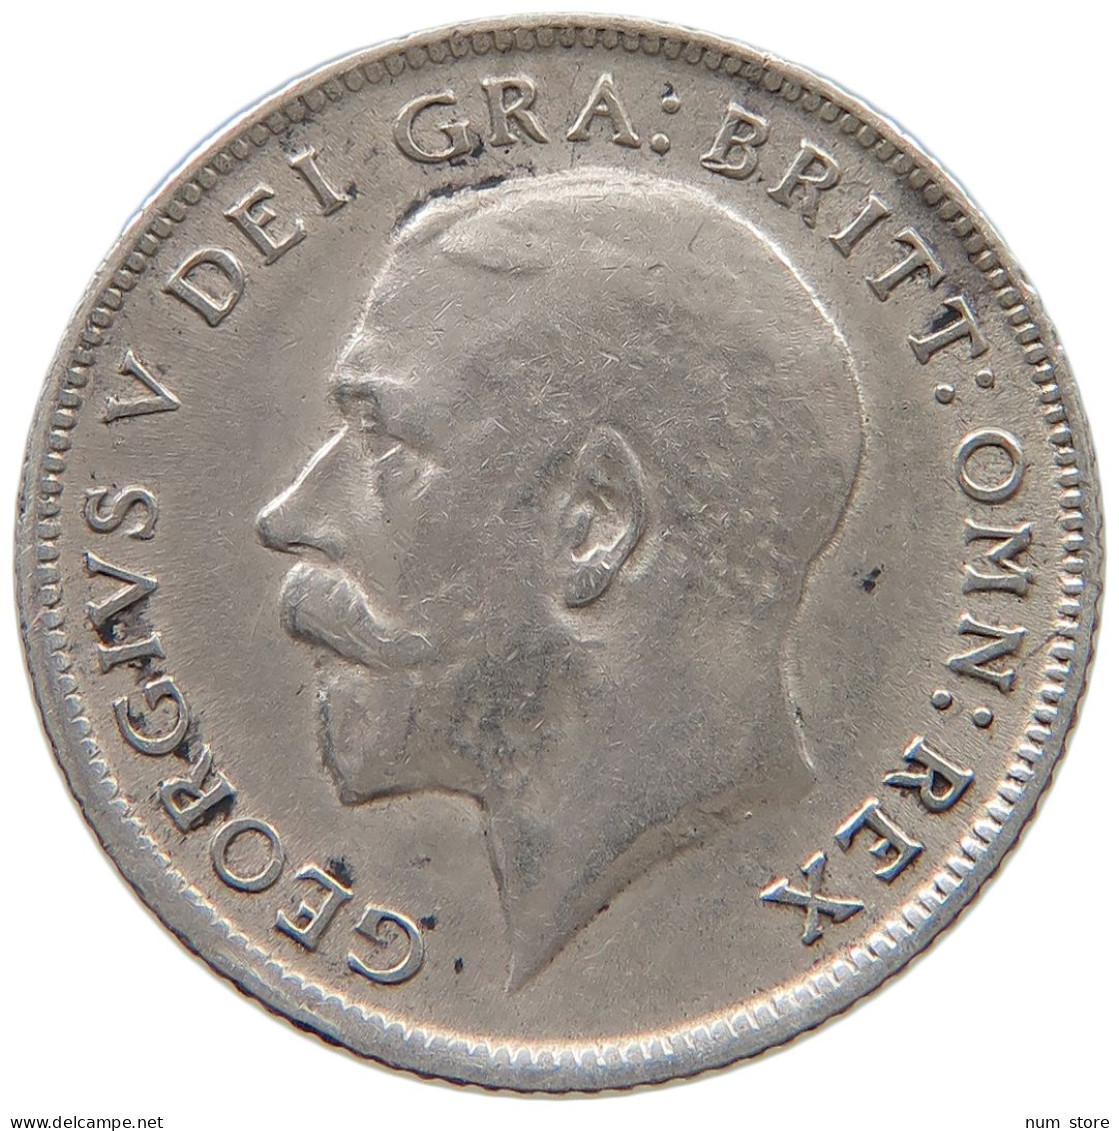 GREAT BRITAIN SIXPENCE 1918 George V. (1910-1936) #a044 0207 - H. 6 Pence